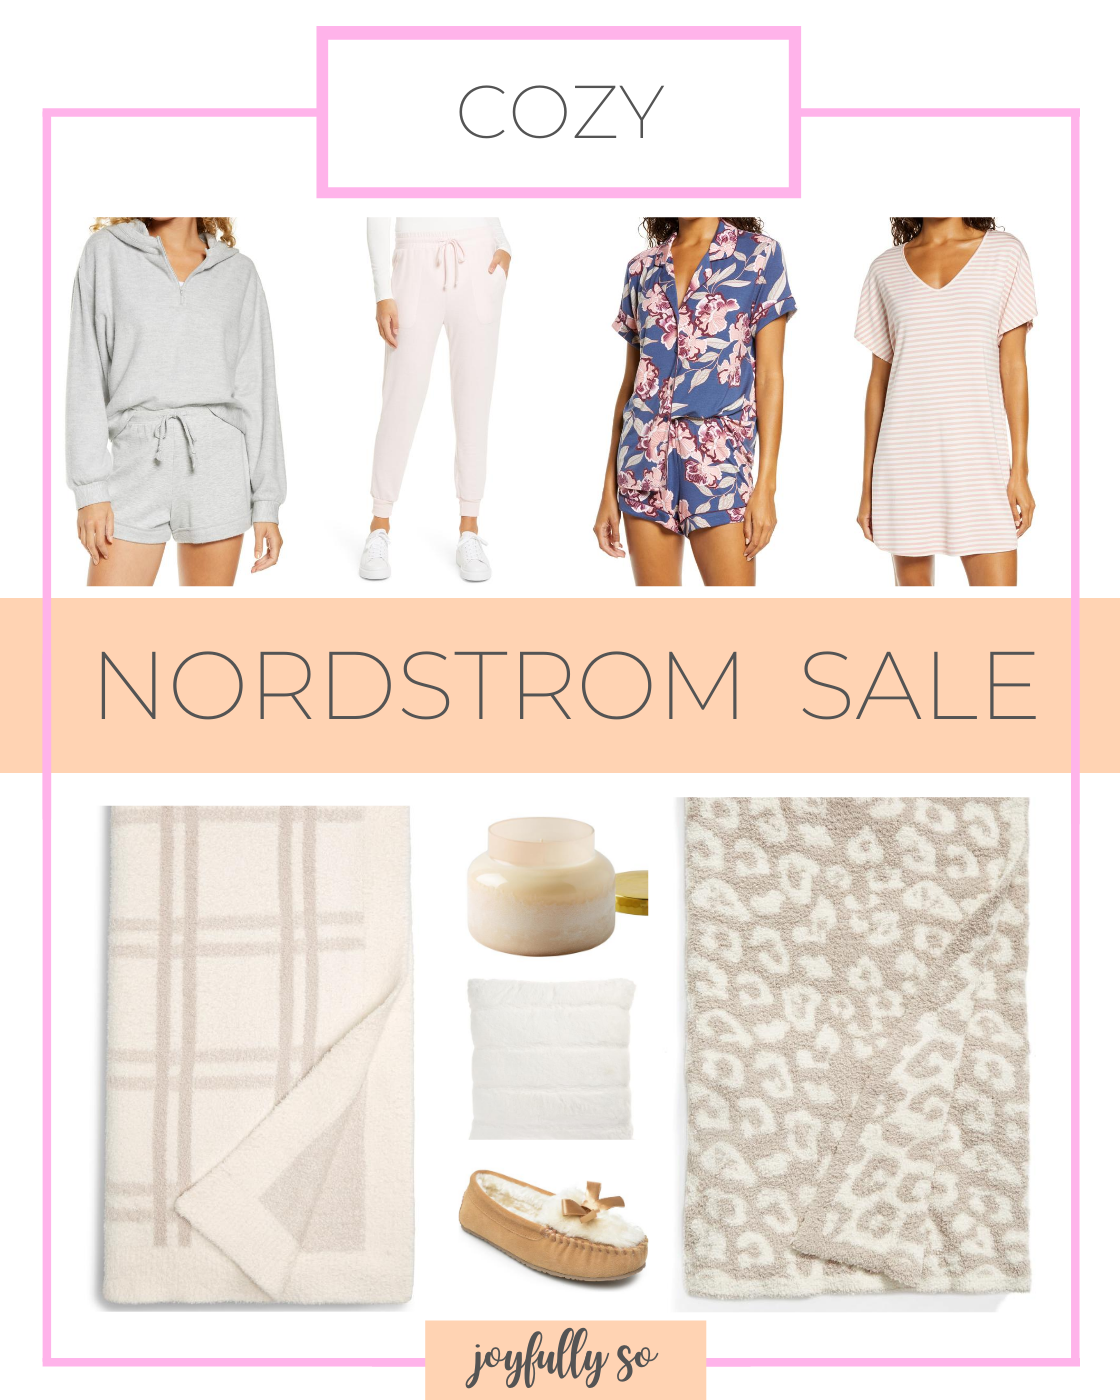 Favorite cozy home and pajama finds in the Nordstrom Sale! To celebrate the NSale and the new website layout on Joyfully So, there is a Tory Burch giveaway! Let’s get to the Women’s Nordstrom Anniversary Sale 2020 Shopping Guide!